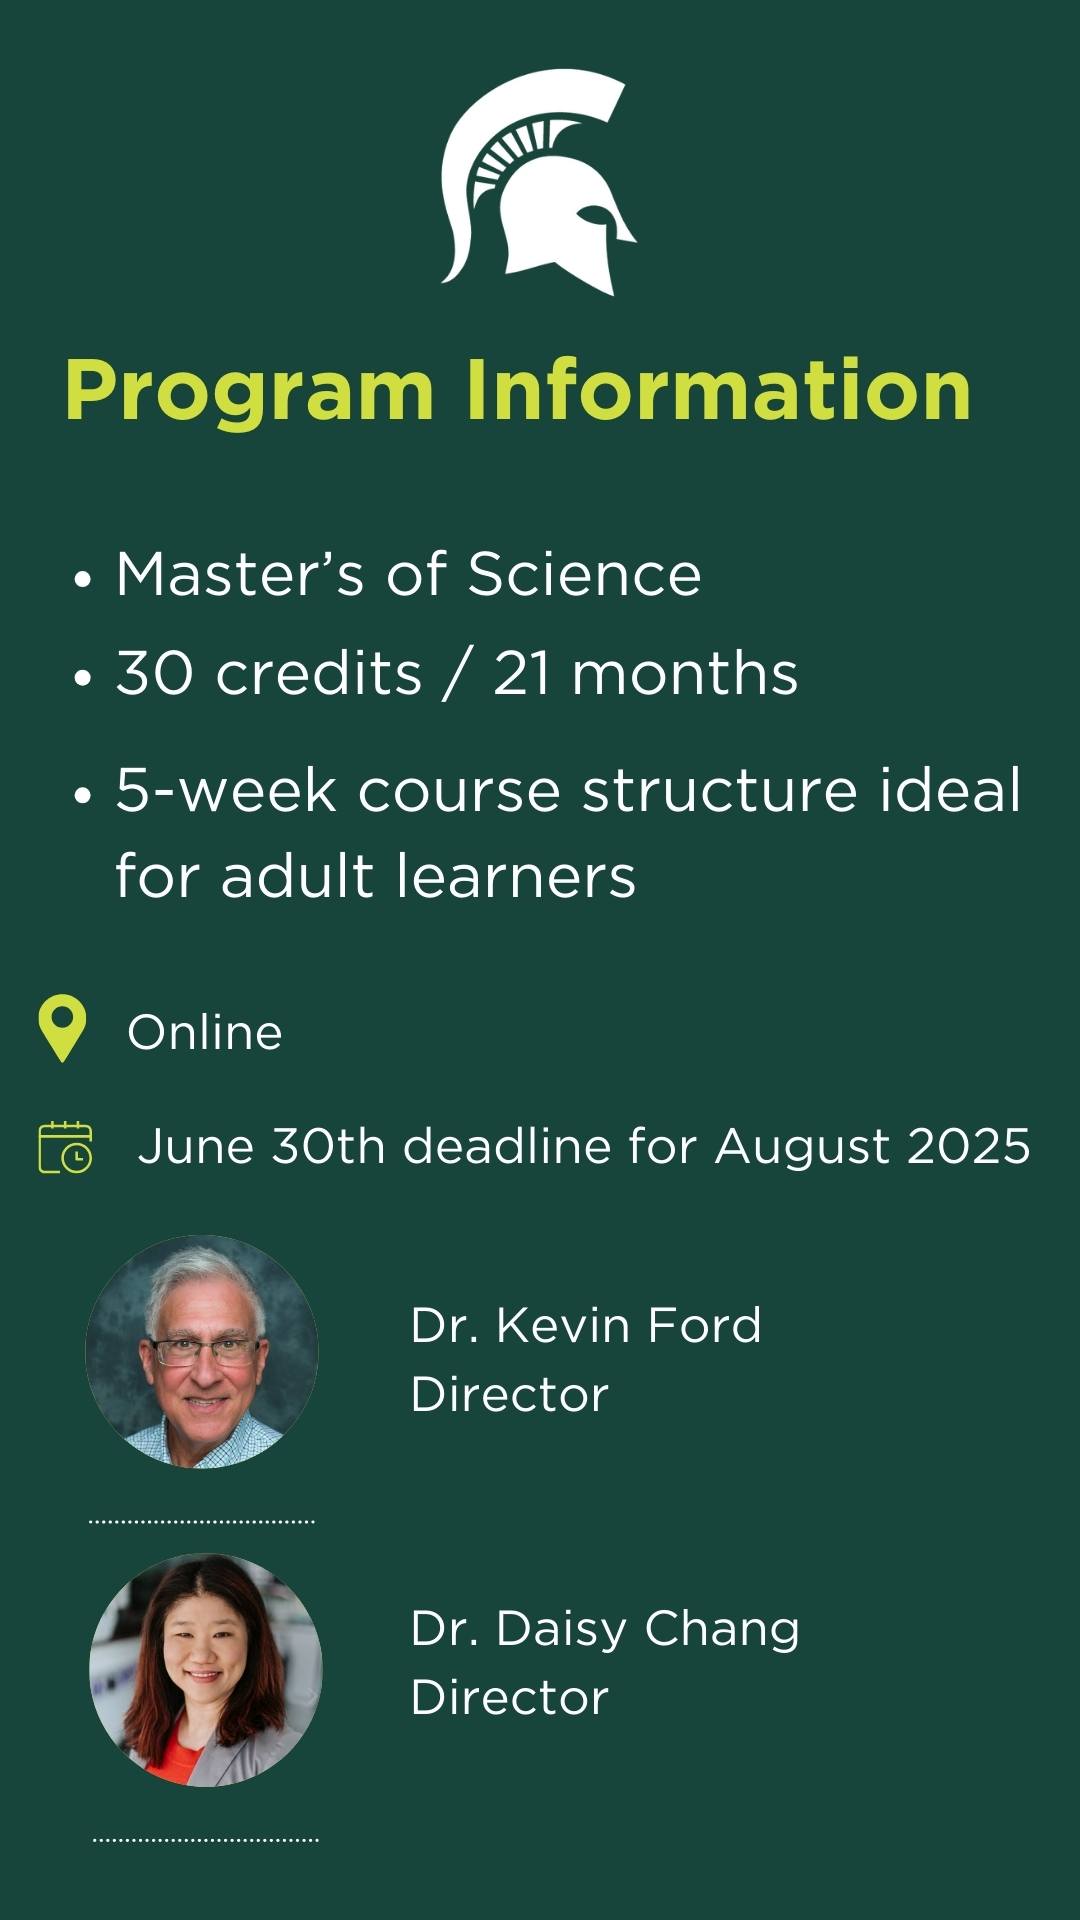 A Spartan head and Program Information at the top of the graphic. Next are bullet points that say "Master's of Science", "30 credits / 21 months", 5-week course structure ideal for adult learners," "online" and a calendar icon that says June 30th deadline for August 2025. Underneath are two images, one of Dr. Kevin Ford, the Department Chair, and the other is Dr. Daisy Chang, the program lead. 